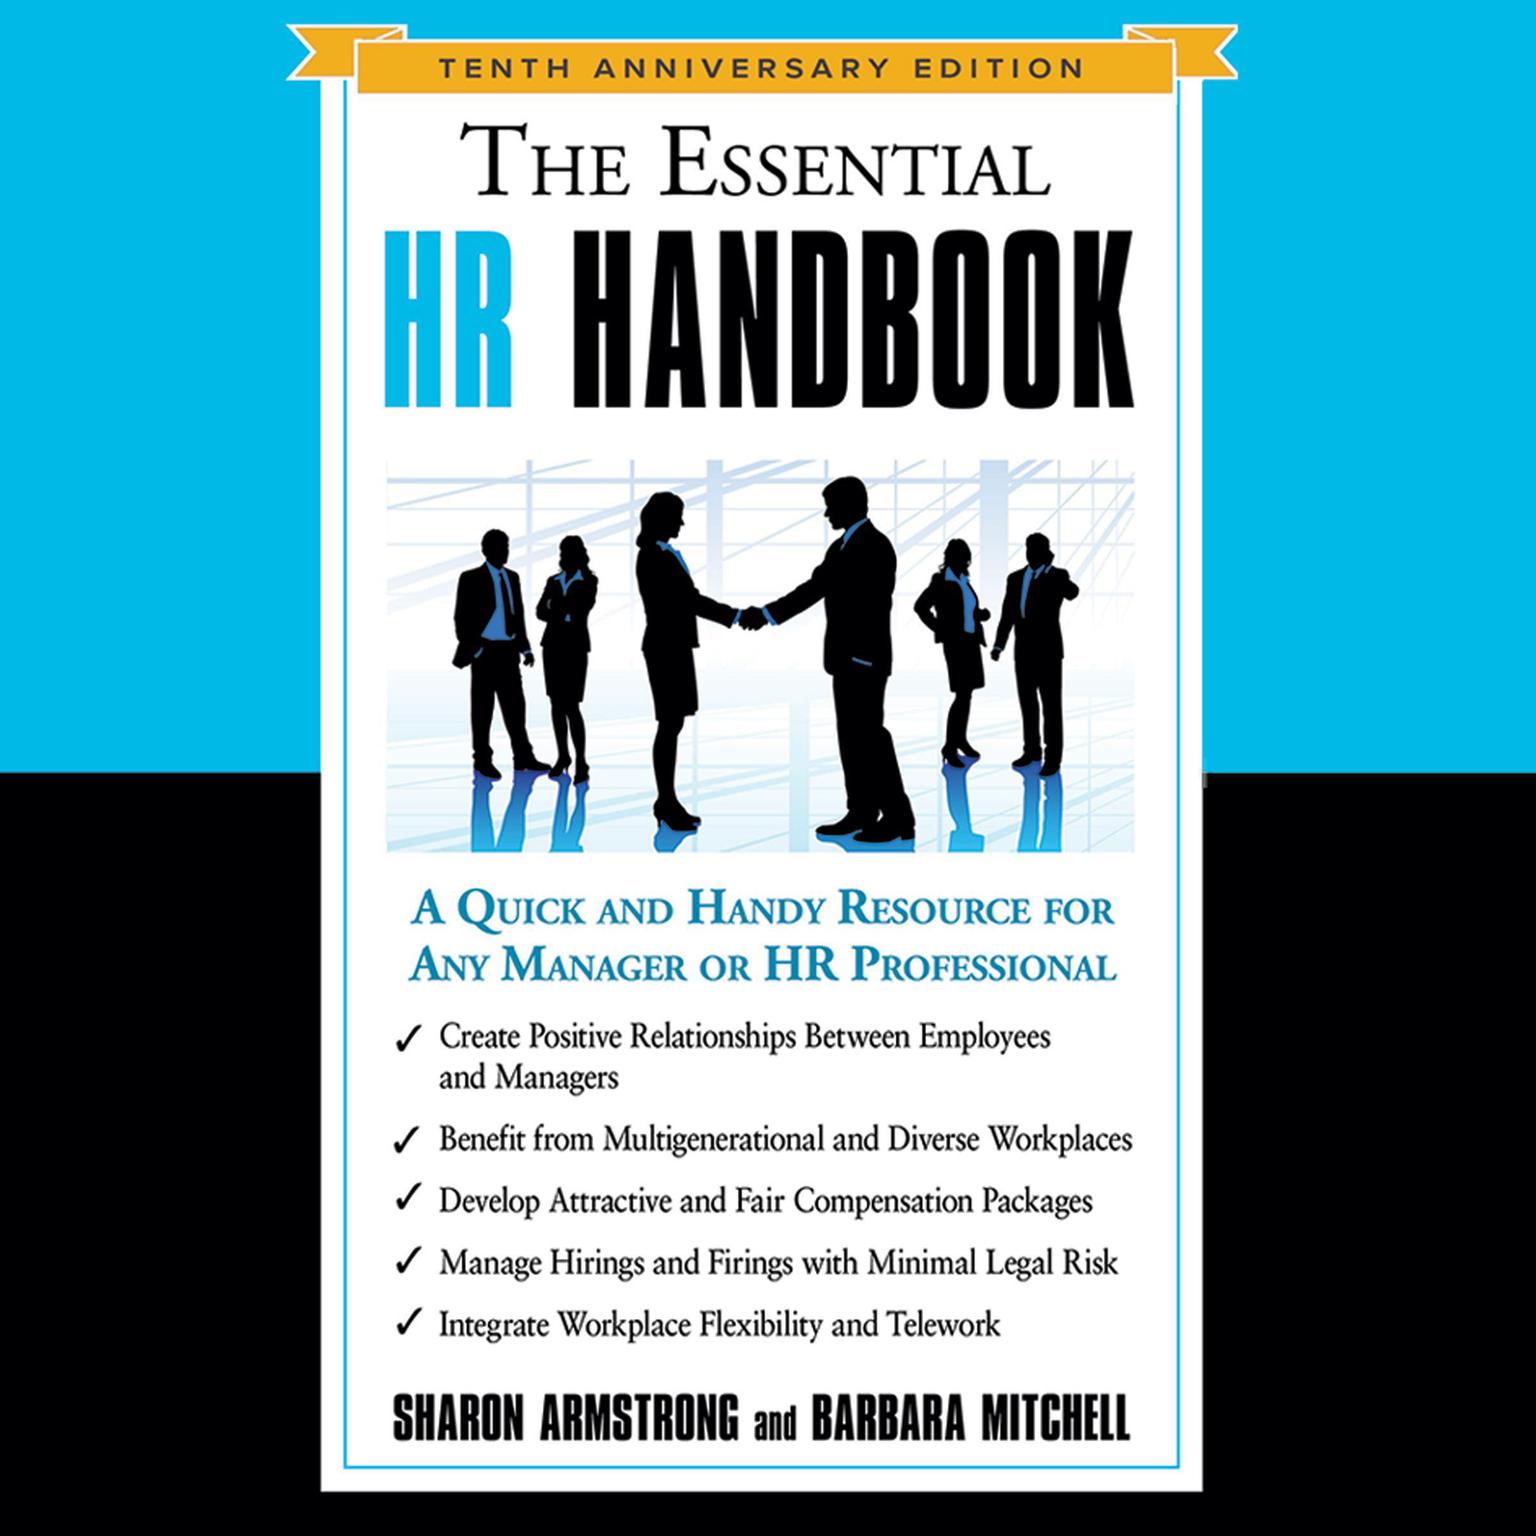 The Essential HR Handbook, 10th Anniversary Edition: A Quick and Handy Resource for Any Manager or HR Professional Audiobook, by Barbara Mitchell